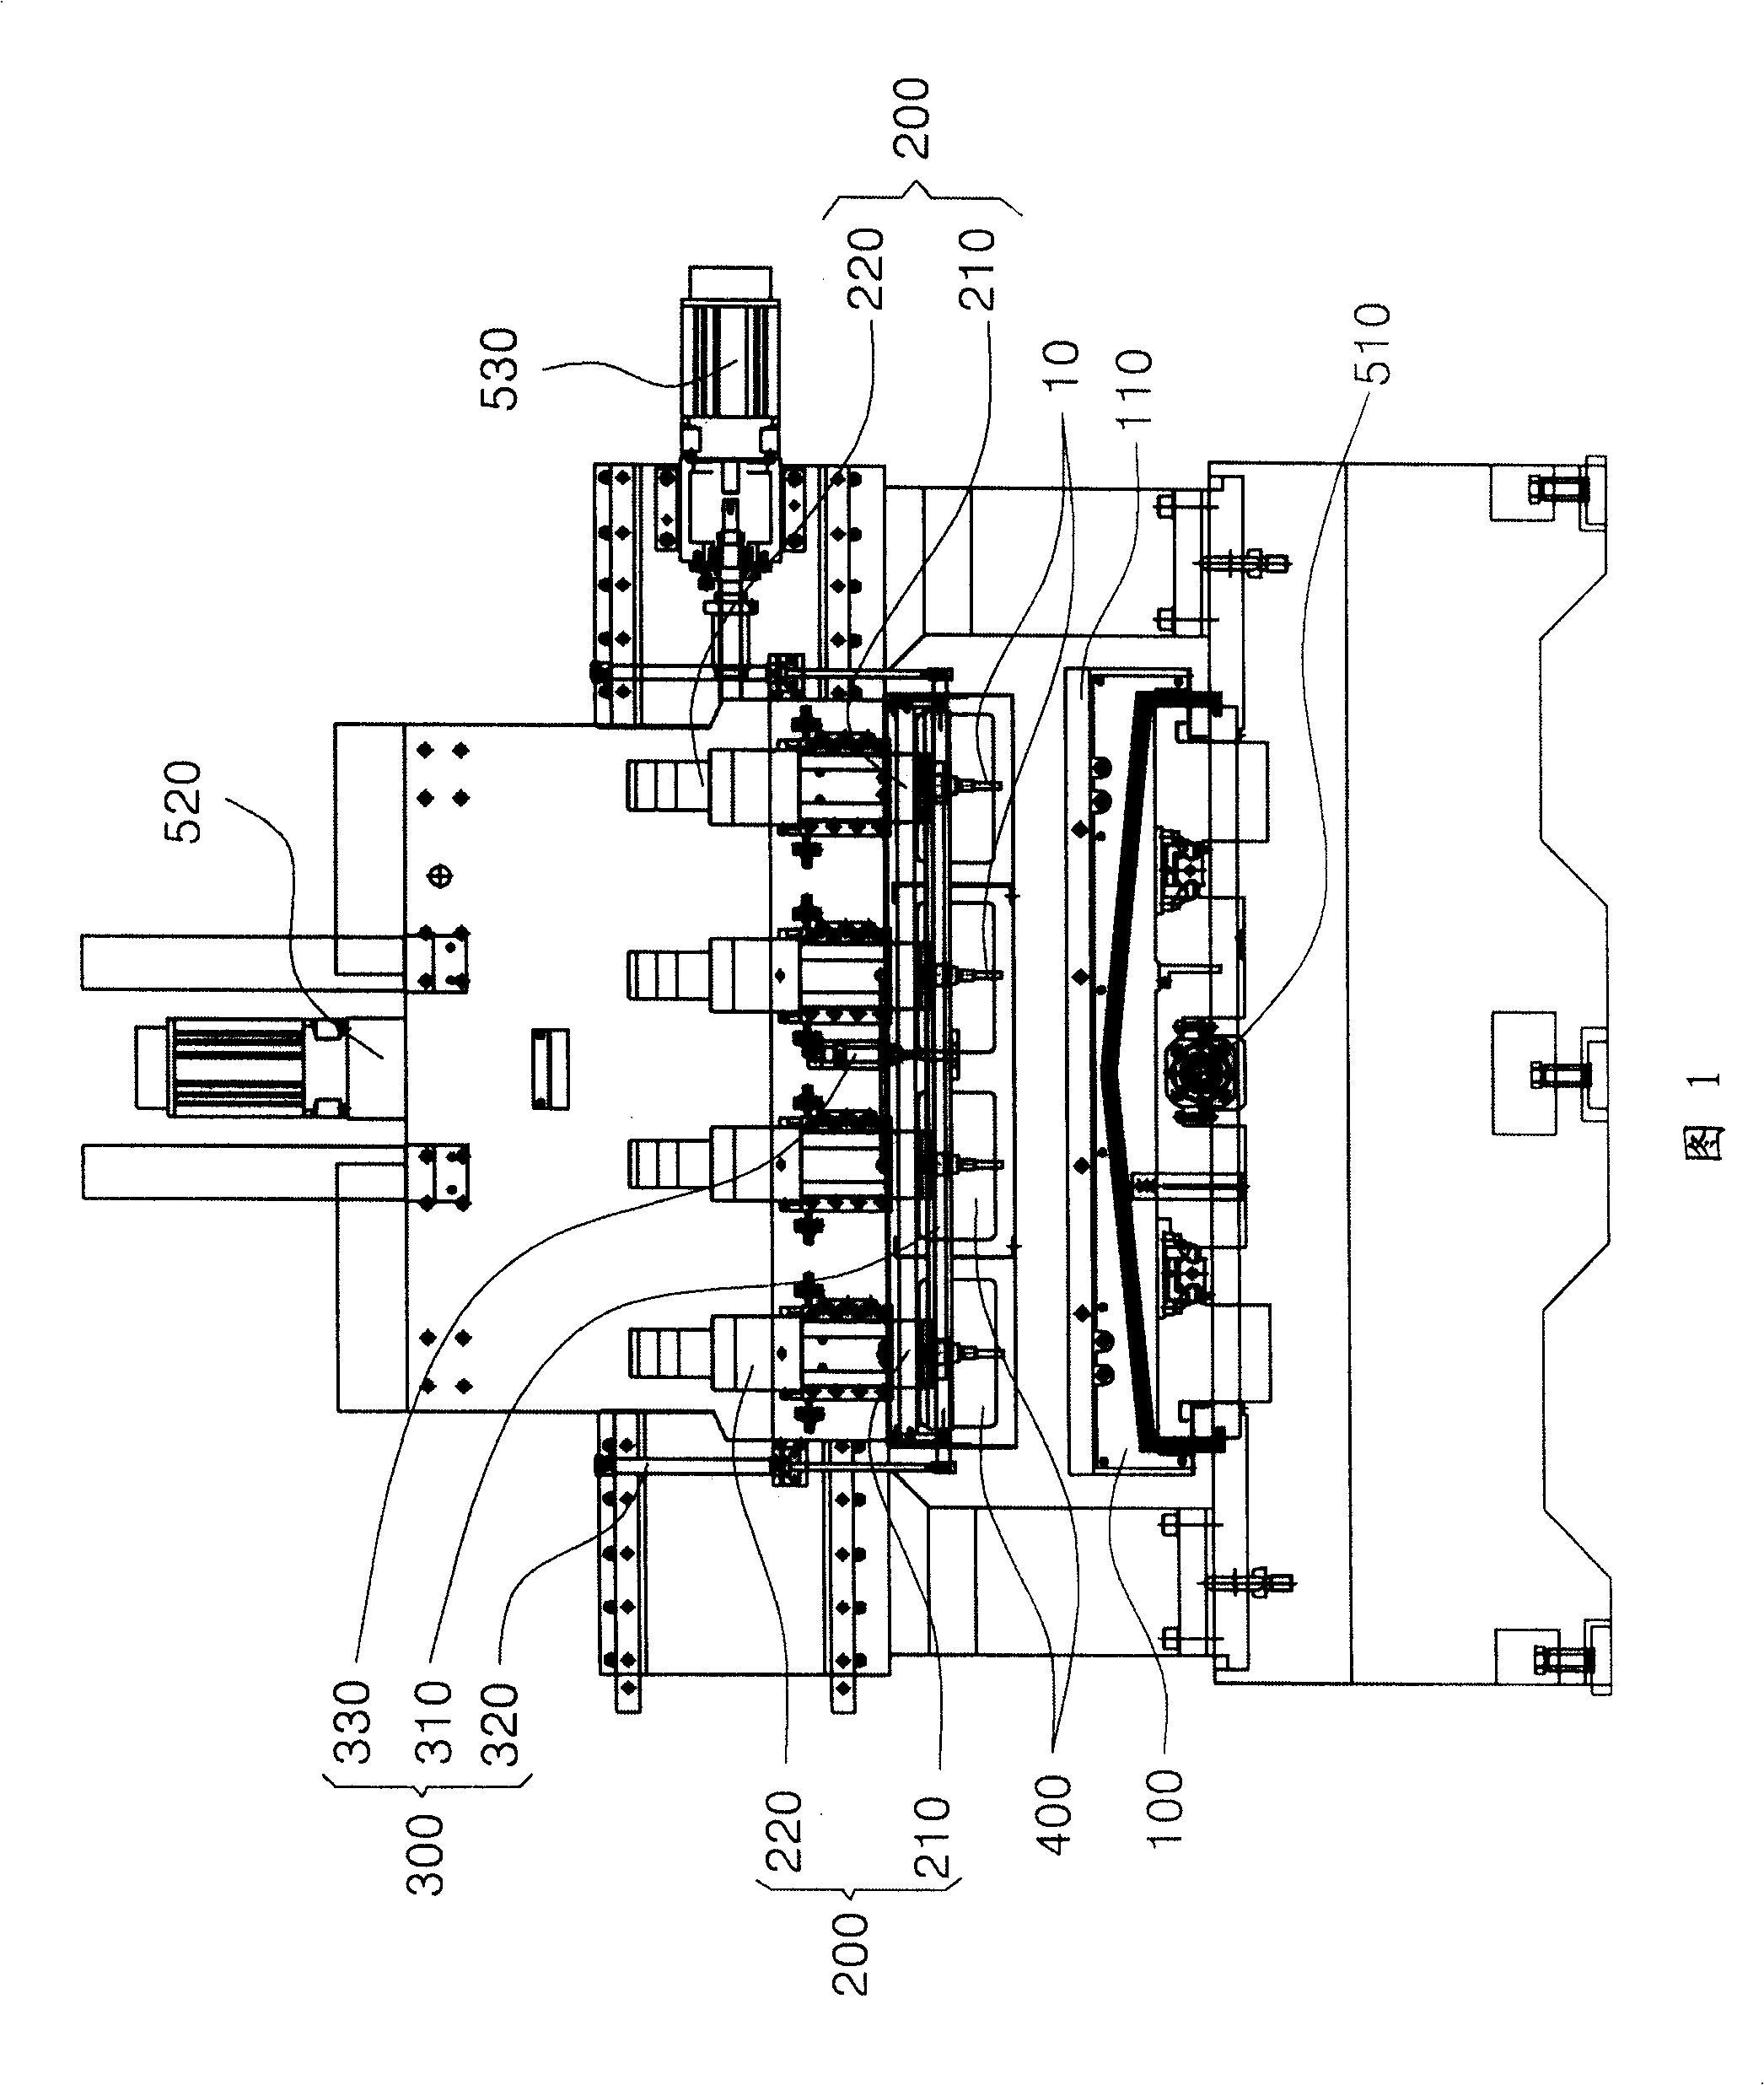 Glass processing apparatus and method